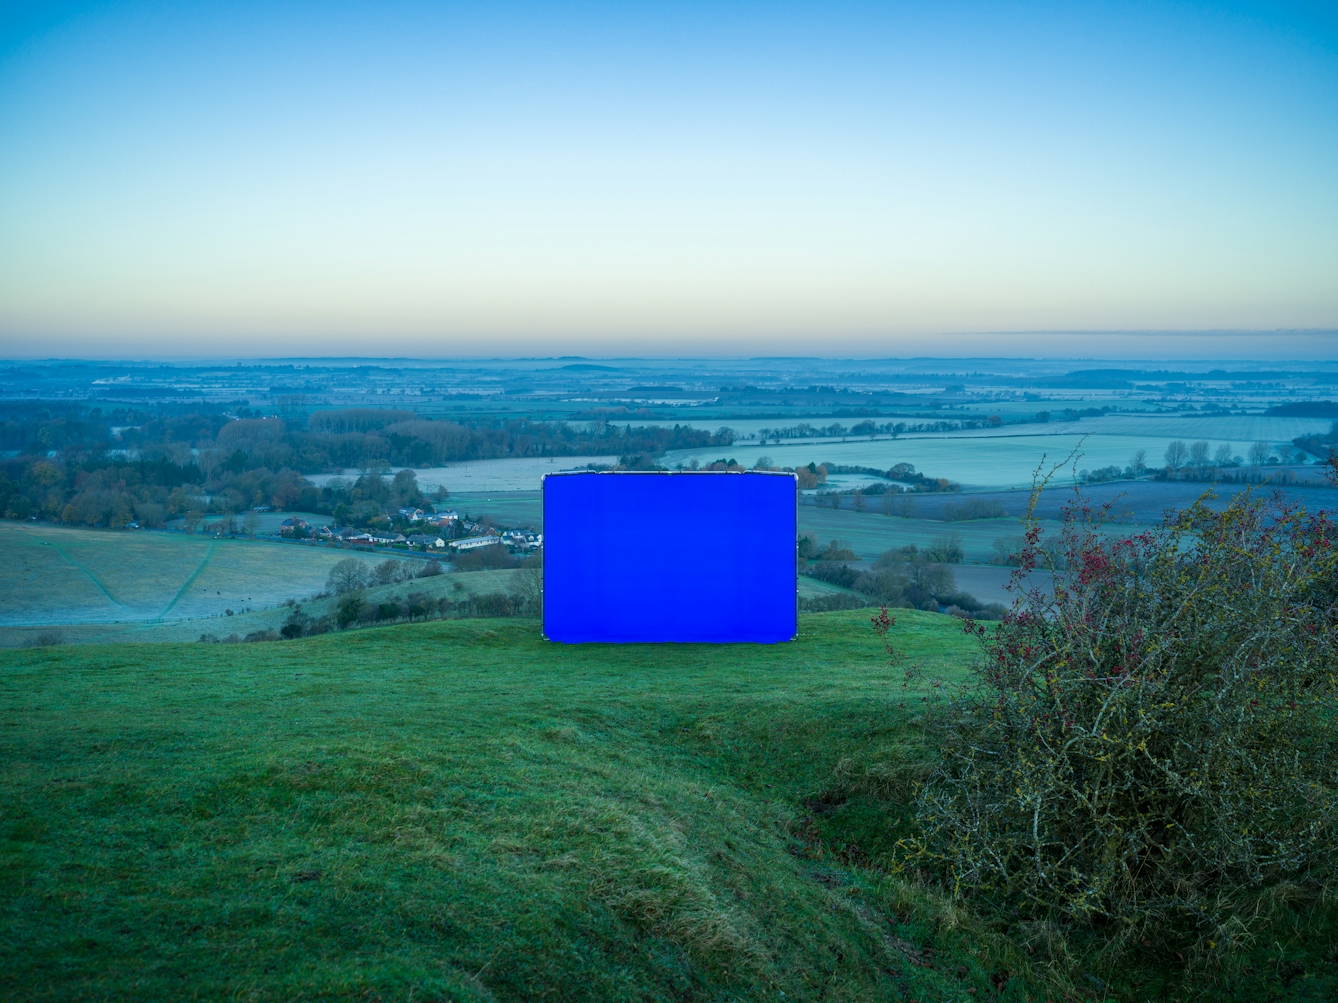 Colour landscape photograph showing a hilltop landscape. The photograph has been taken at dawn and the landscape has a frosty feel to it. In the centre of the image is a large rectangular photographic background frame. Stretched across the frame is a vibrant blue chroma key fabric. The frame is standing on a grass mound on the top of a hill. Behind the screen is the view to the far distance containing fields, tiny buildings and then the horizon. The sky above the horizon is an attractive blend of hues, from warm golden tones at the horizon line blending to a vibrant blue tone as the sky extends upwards. In the foreground to the right is an untidy twiggy shrub, nestled in a hollow.